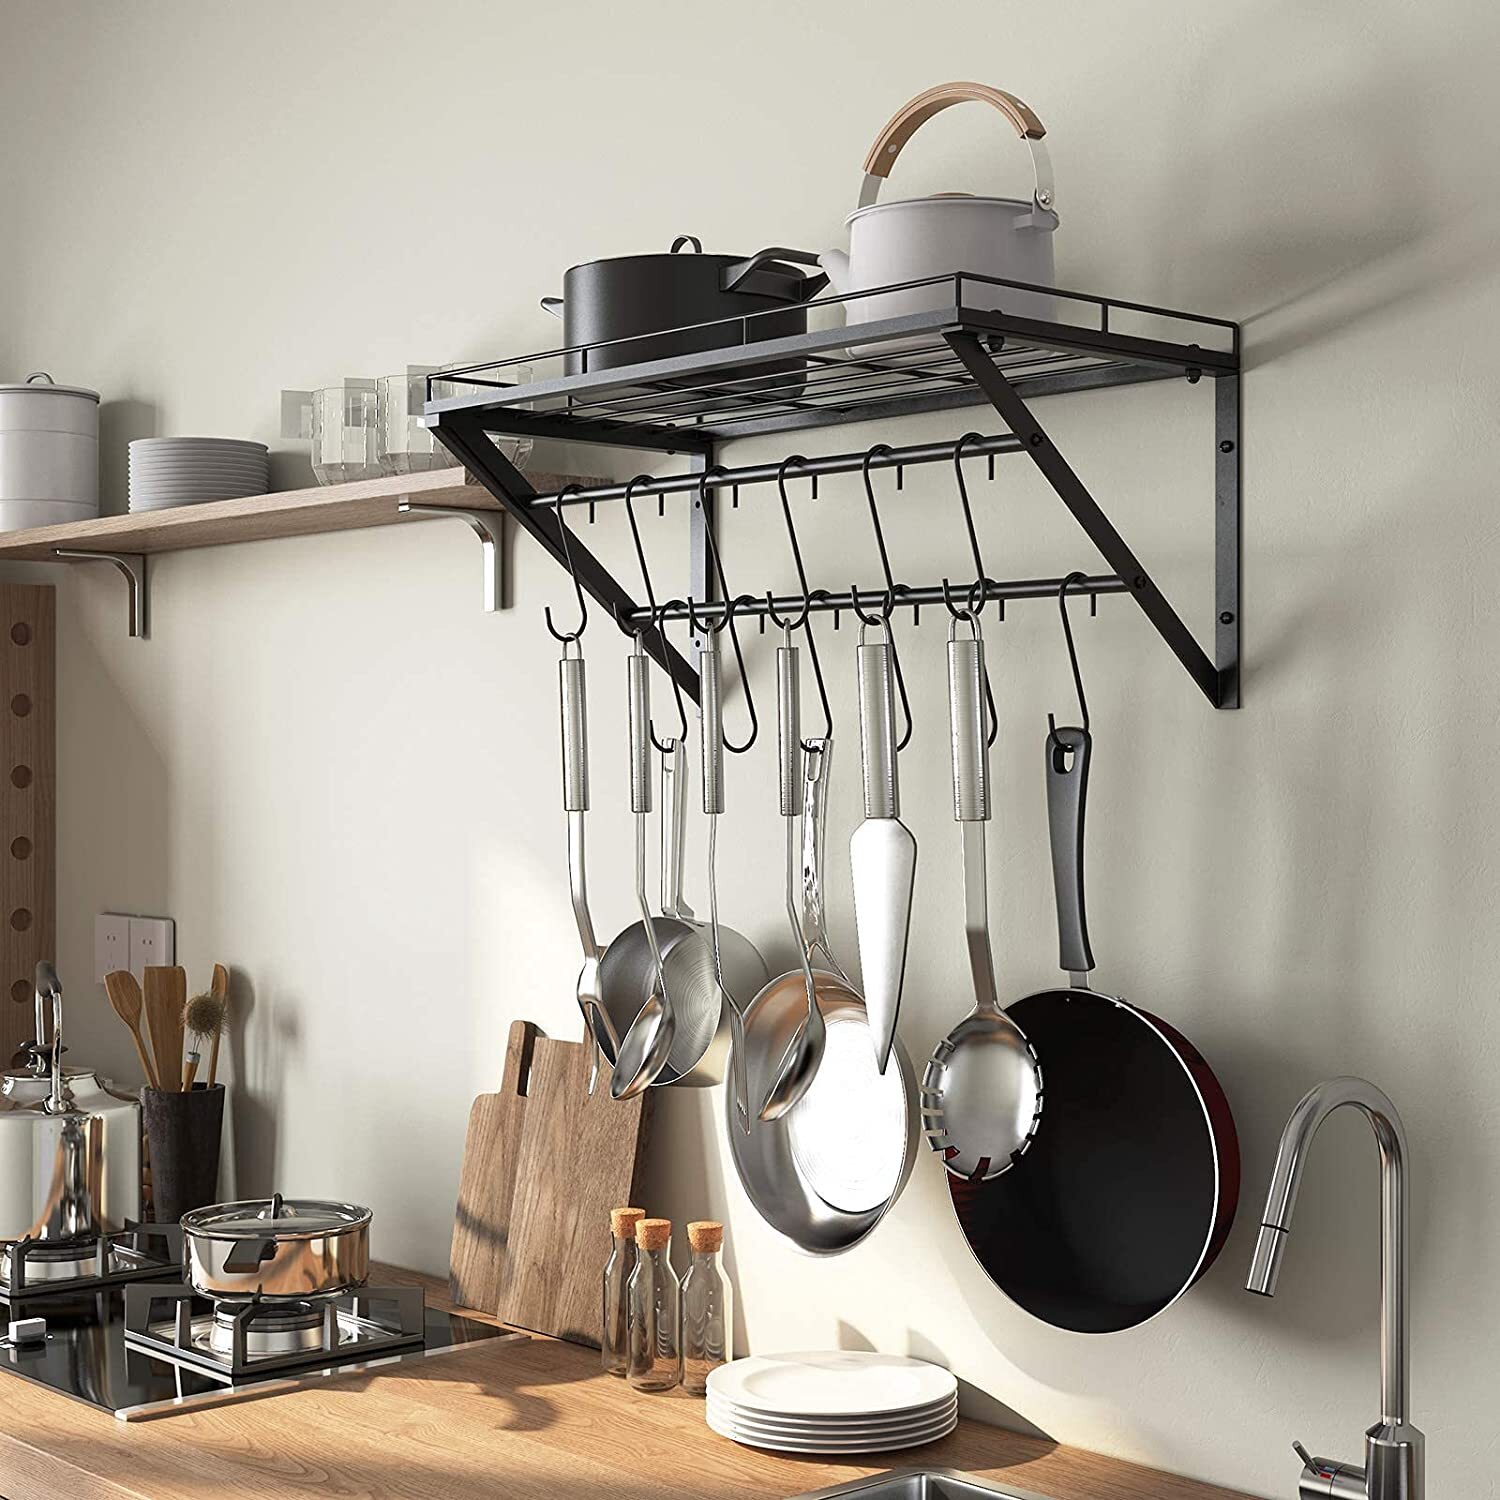 Wall Mounted Rack for Hanging Cast Iron Pans